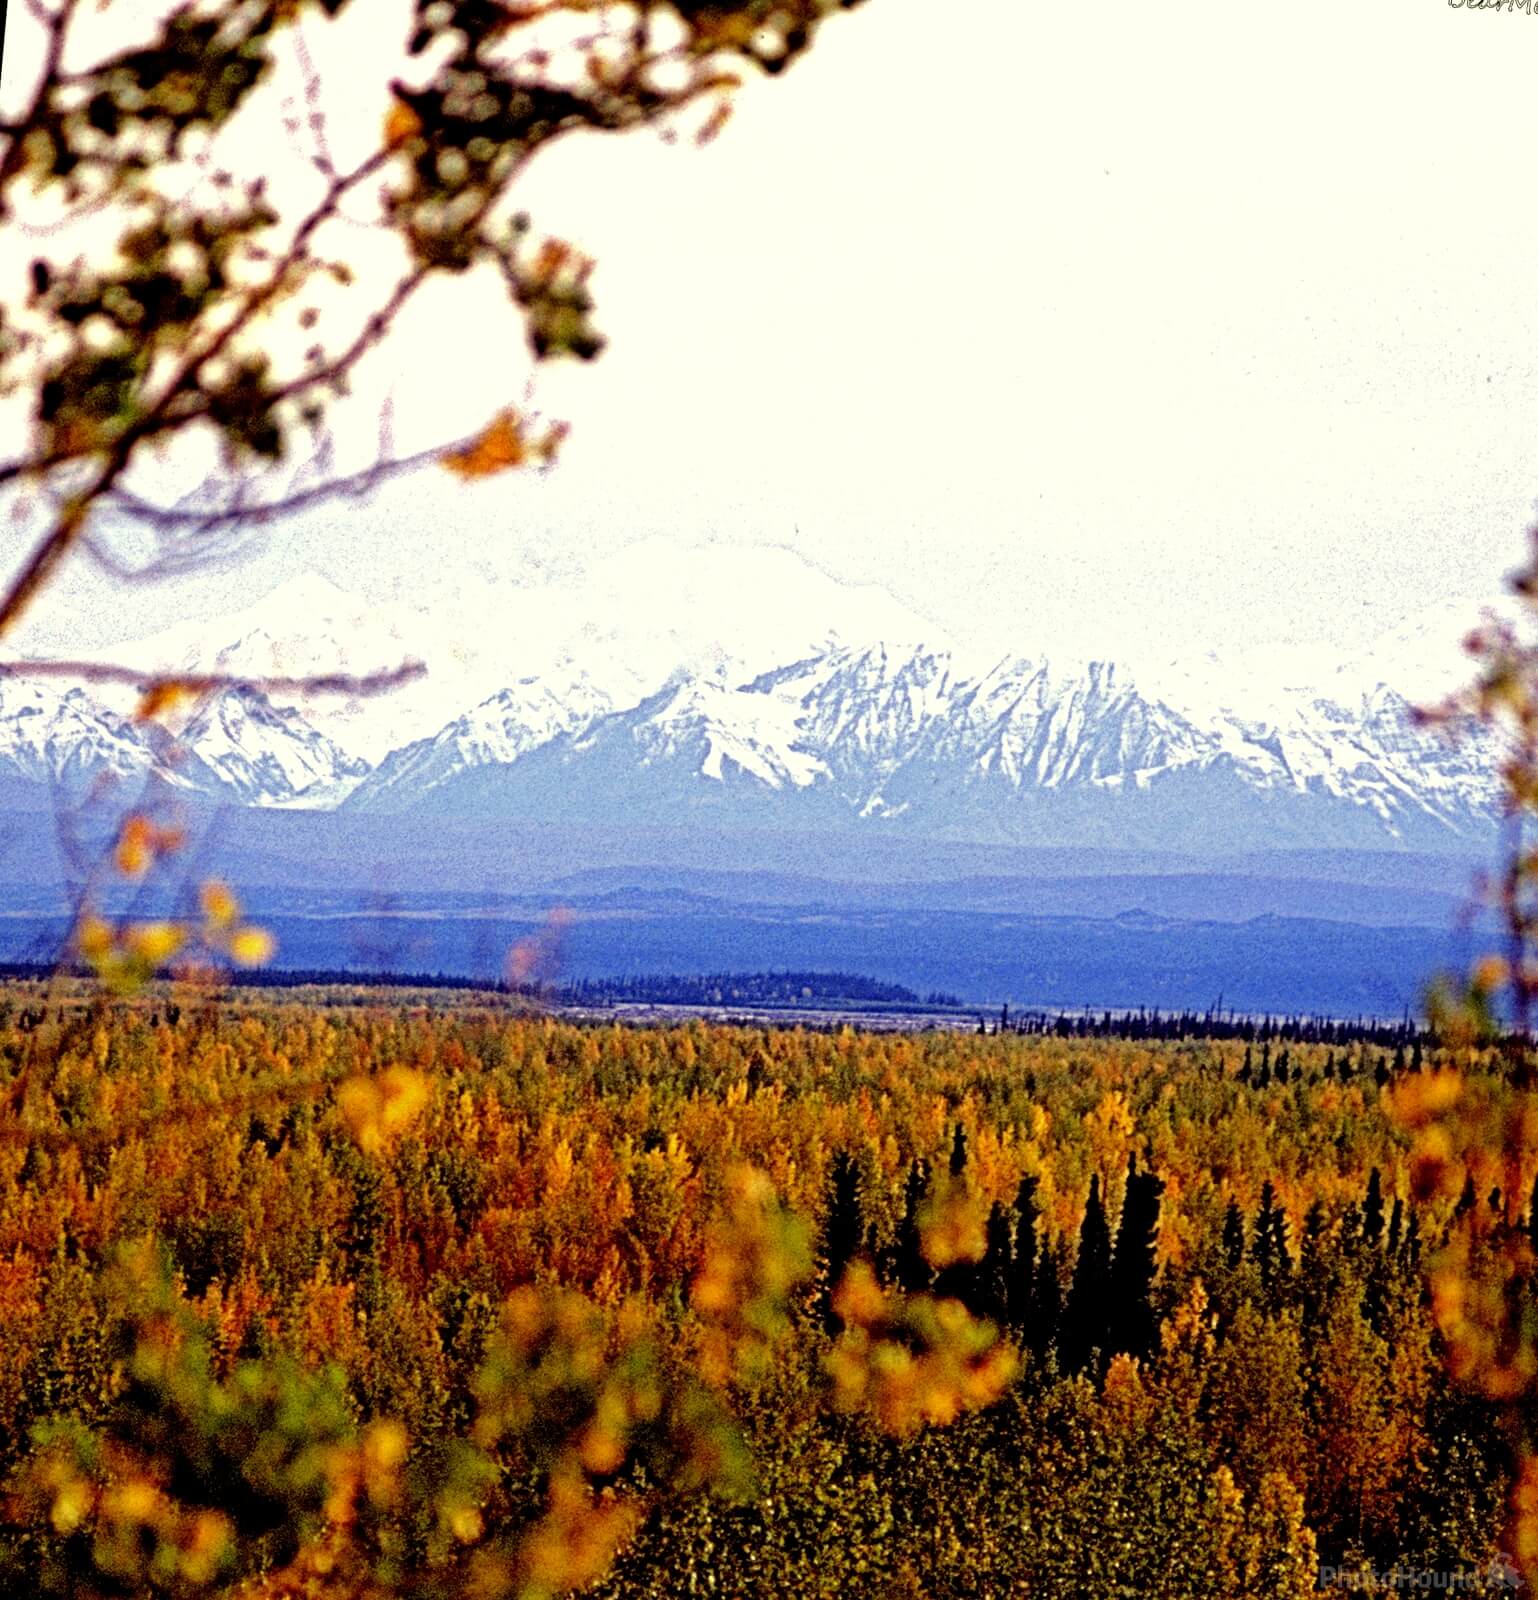 Image of Northern Terminus of the Alaska Highway by Ralph Troutman